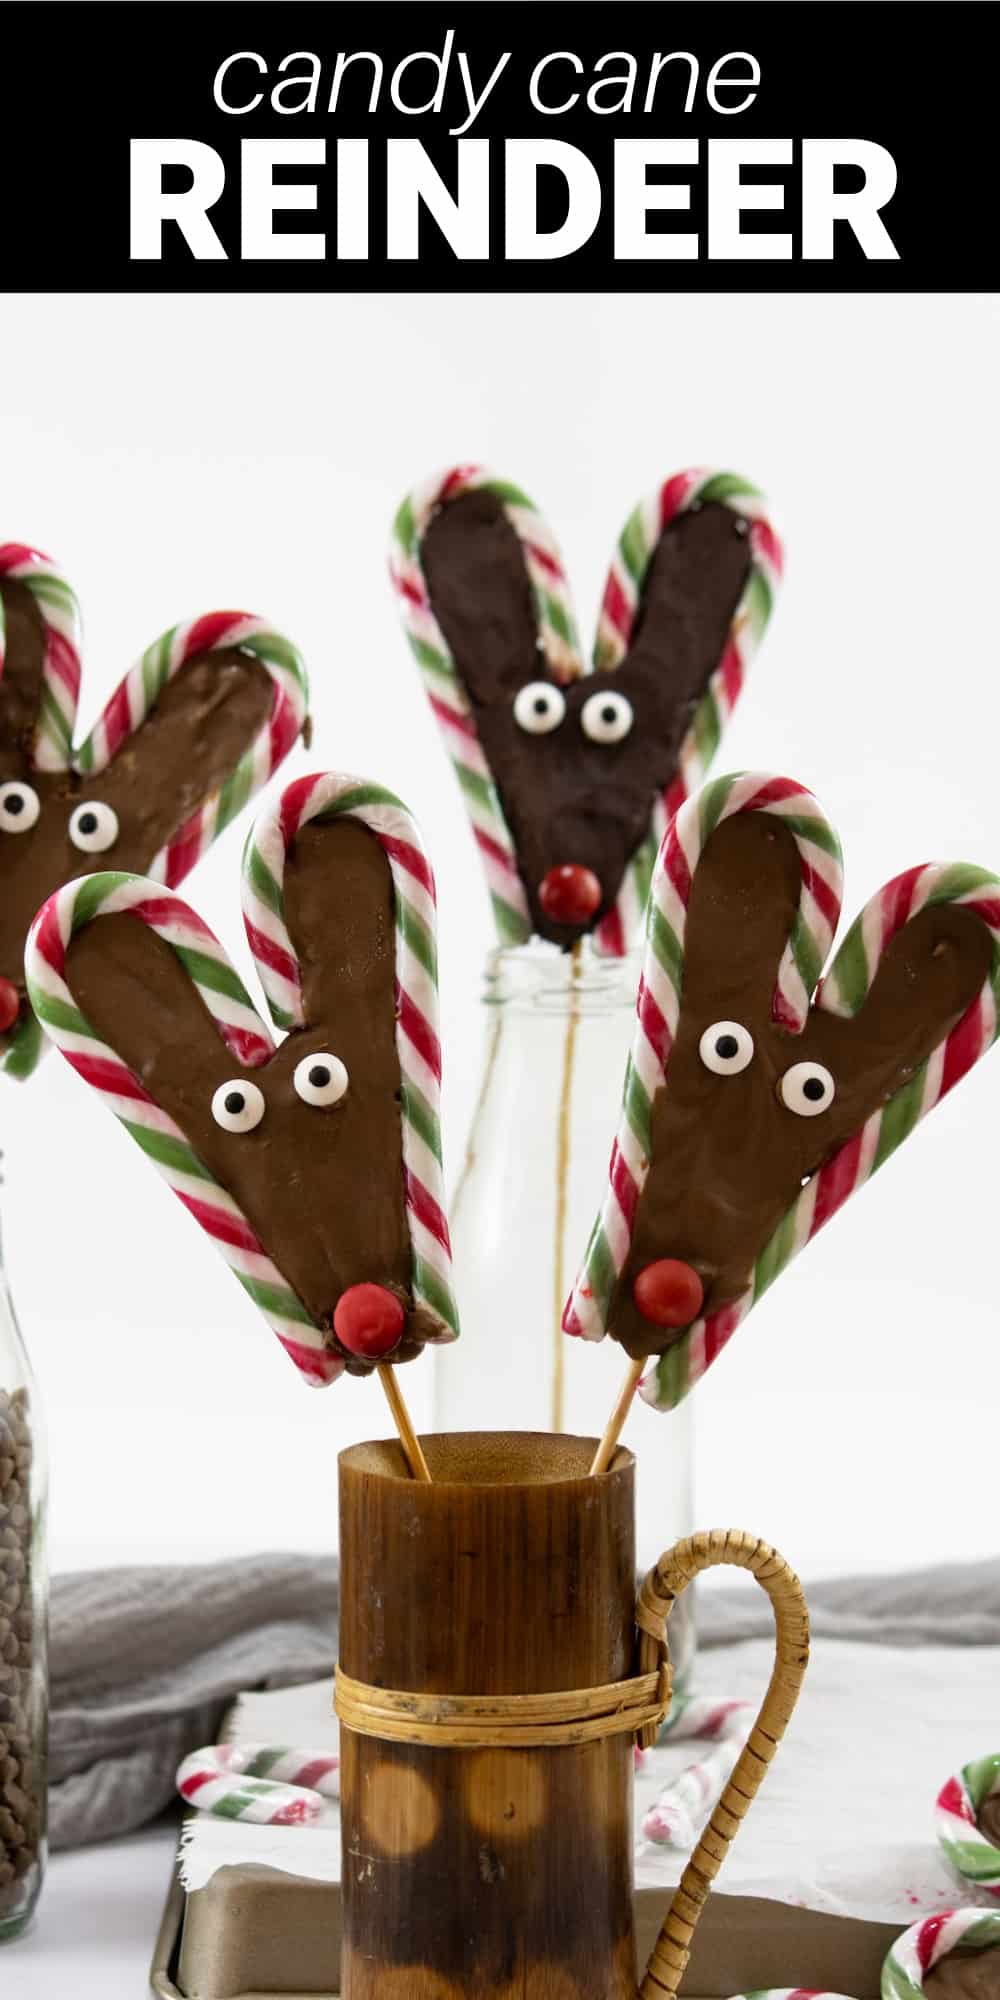 These adorable candy cane reindeer may just be the cutest treat you’ll make this holiday season. Melted chocolate and candy canes are used to form festive reindeer faces, complete with candy eyeballs and an M&M nose! The treats are served on sticks, for a lollipop-like candy dessert that will be a huge hit with kids and adults alike.